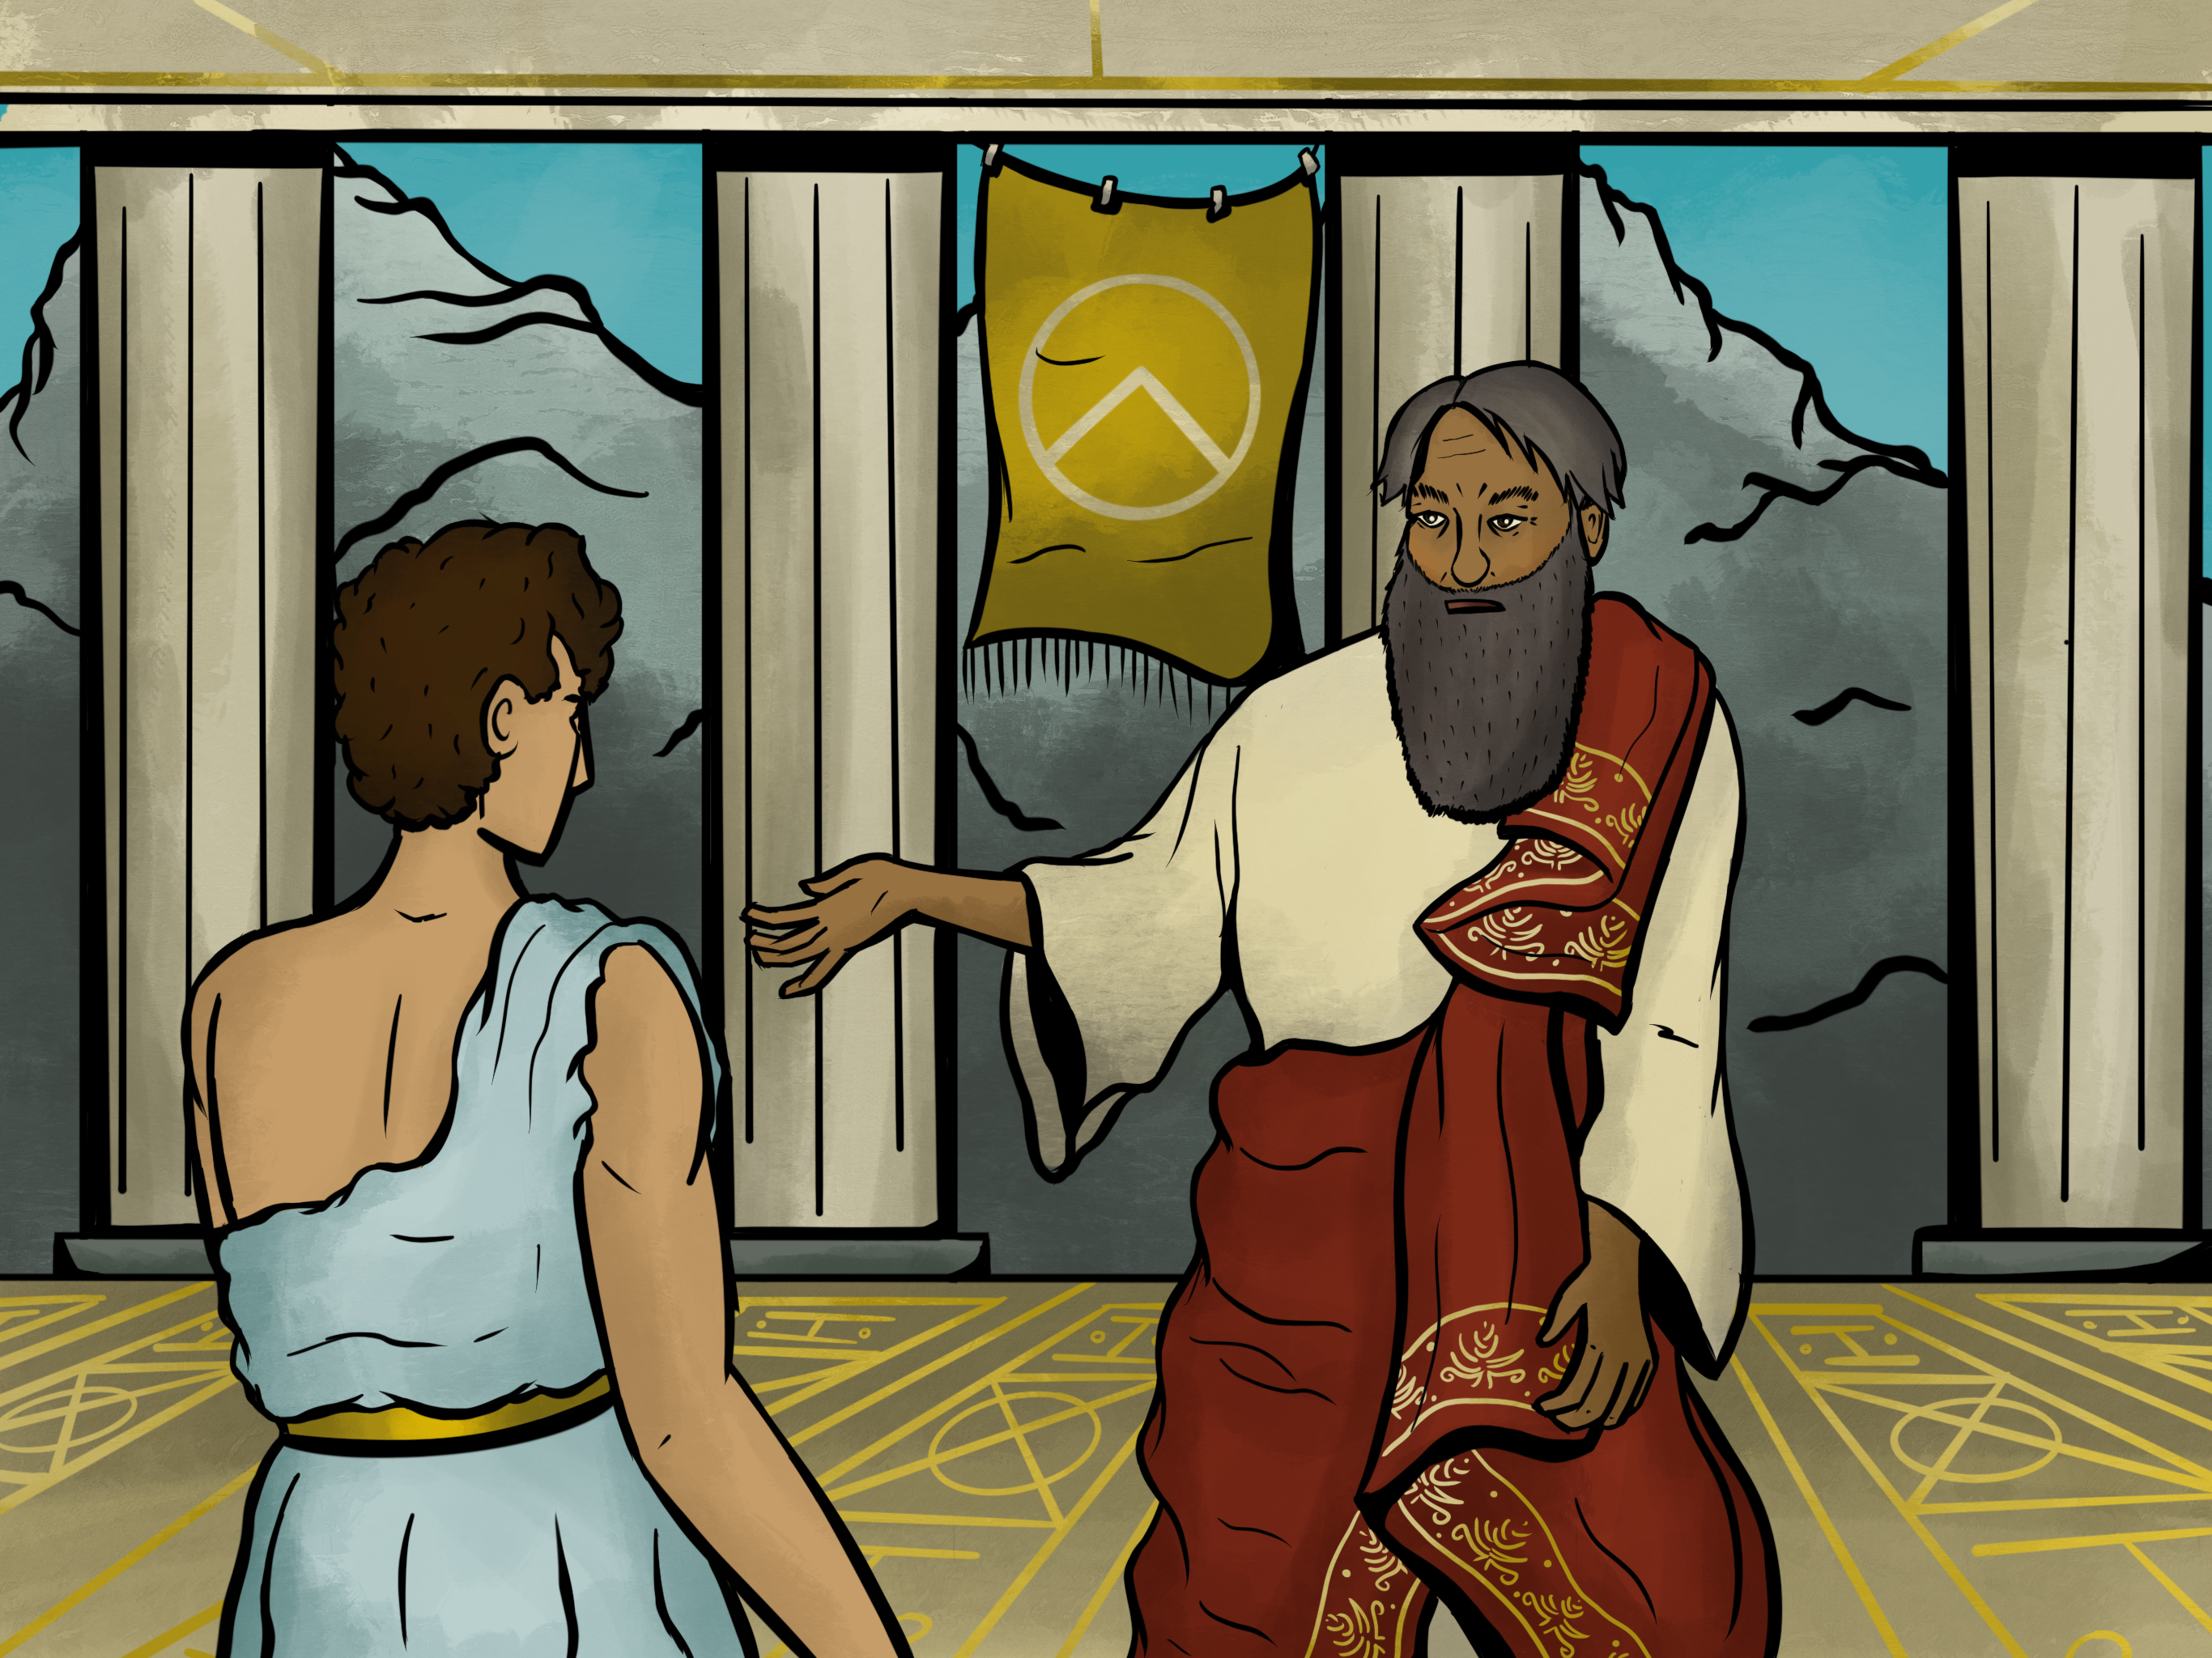 The Player Character is receiving advice from a wealthy townsperson in this comic; the townsperson is draped with a bright red robe.